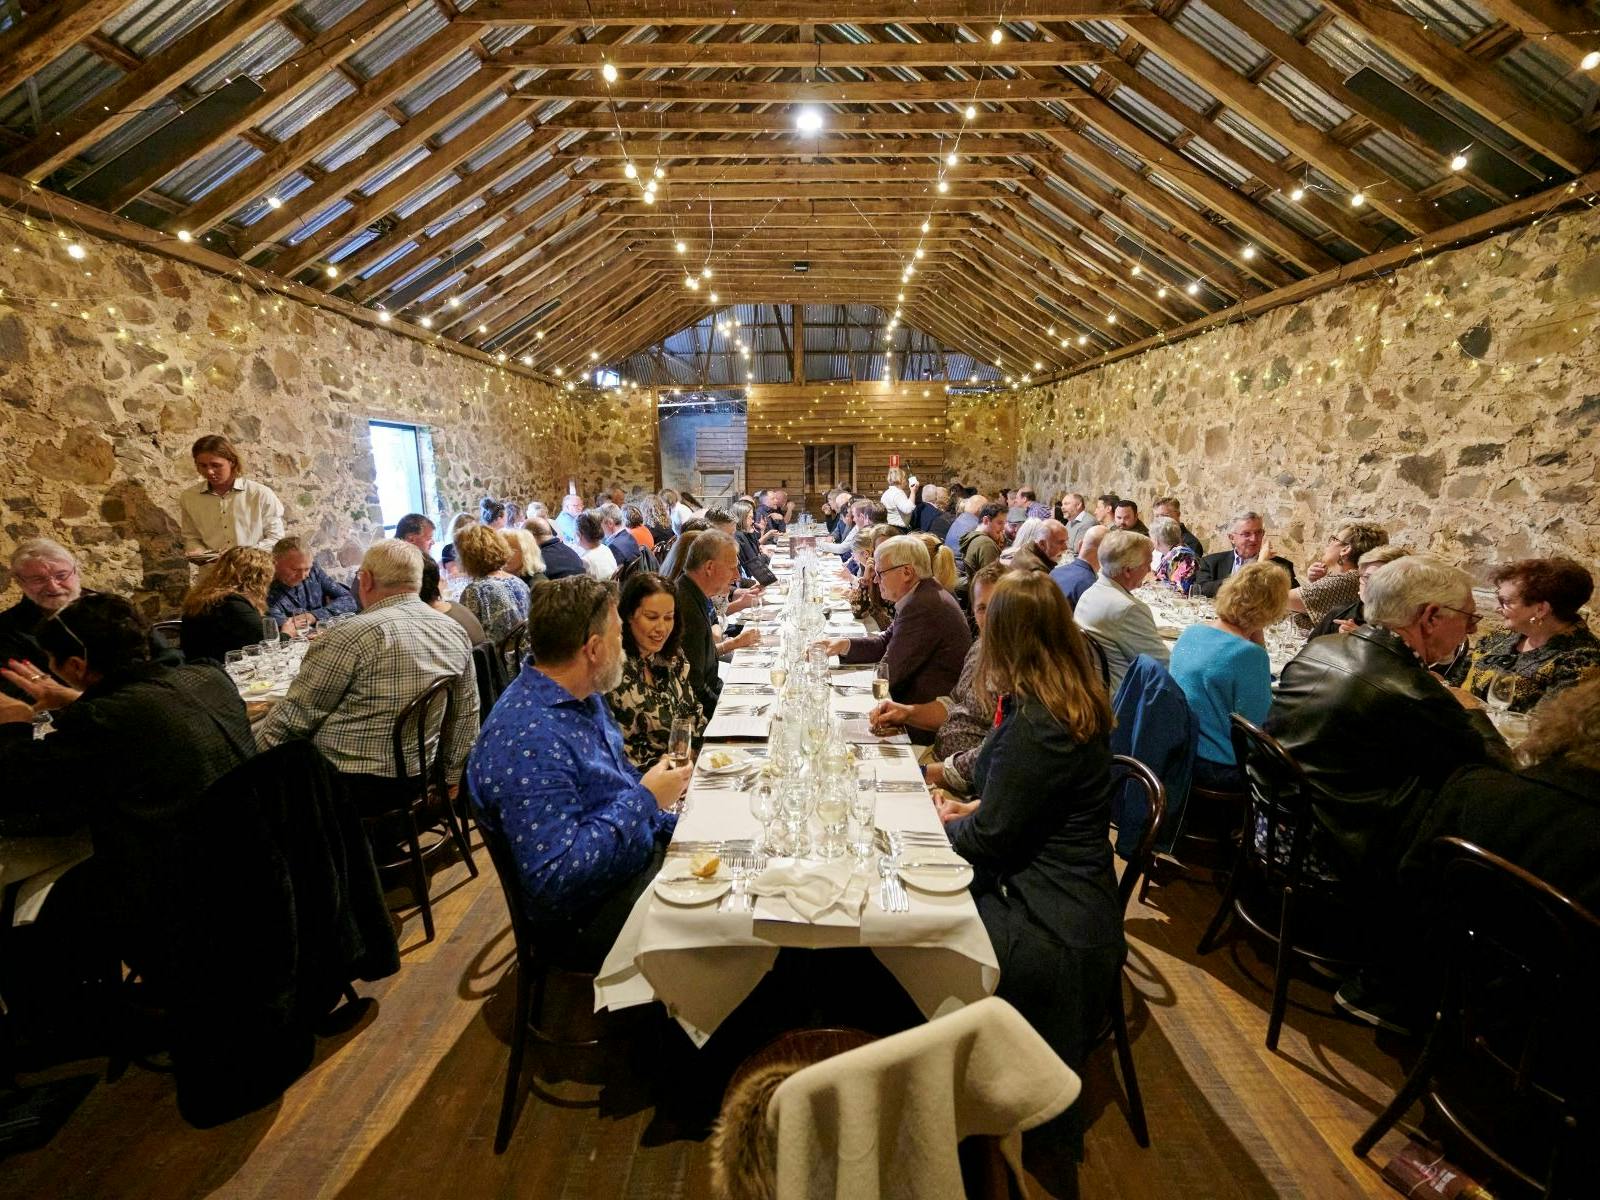 Long tables are filled with customers, enjoying the Taste the Region dinner, in historic venue.